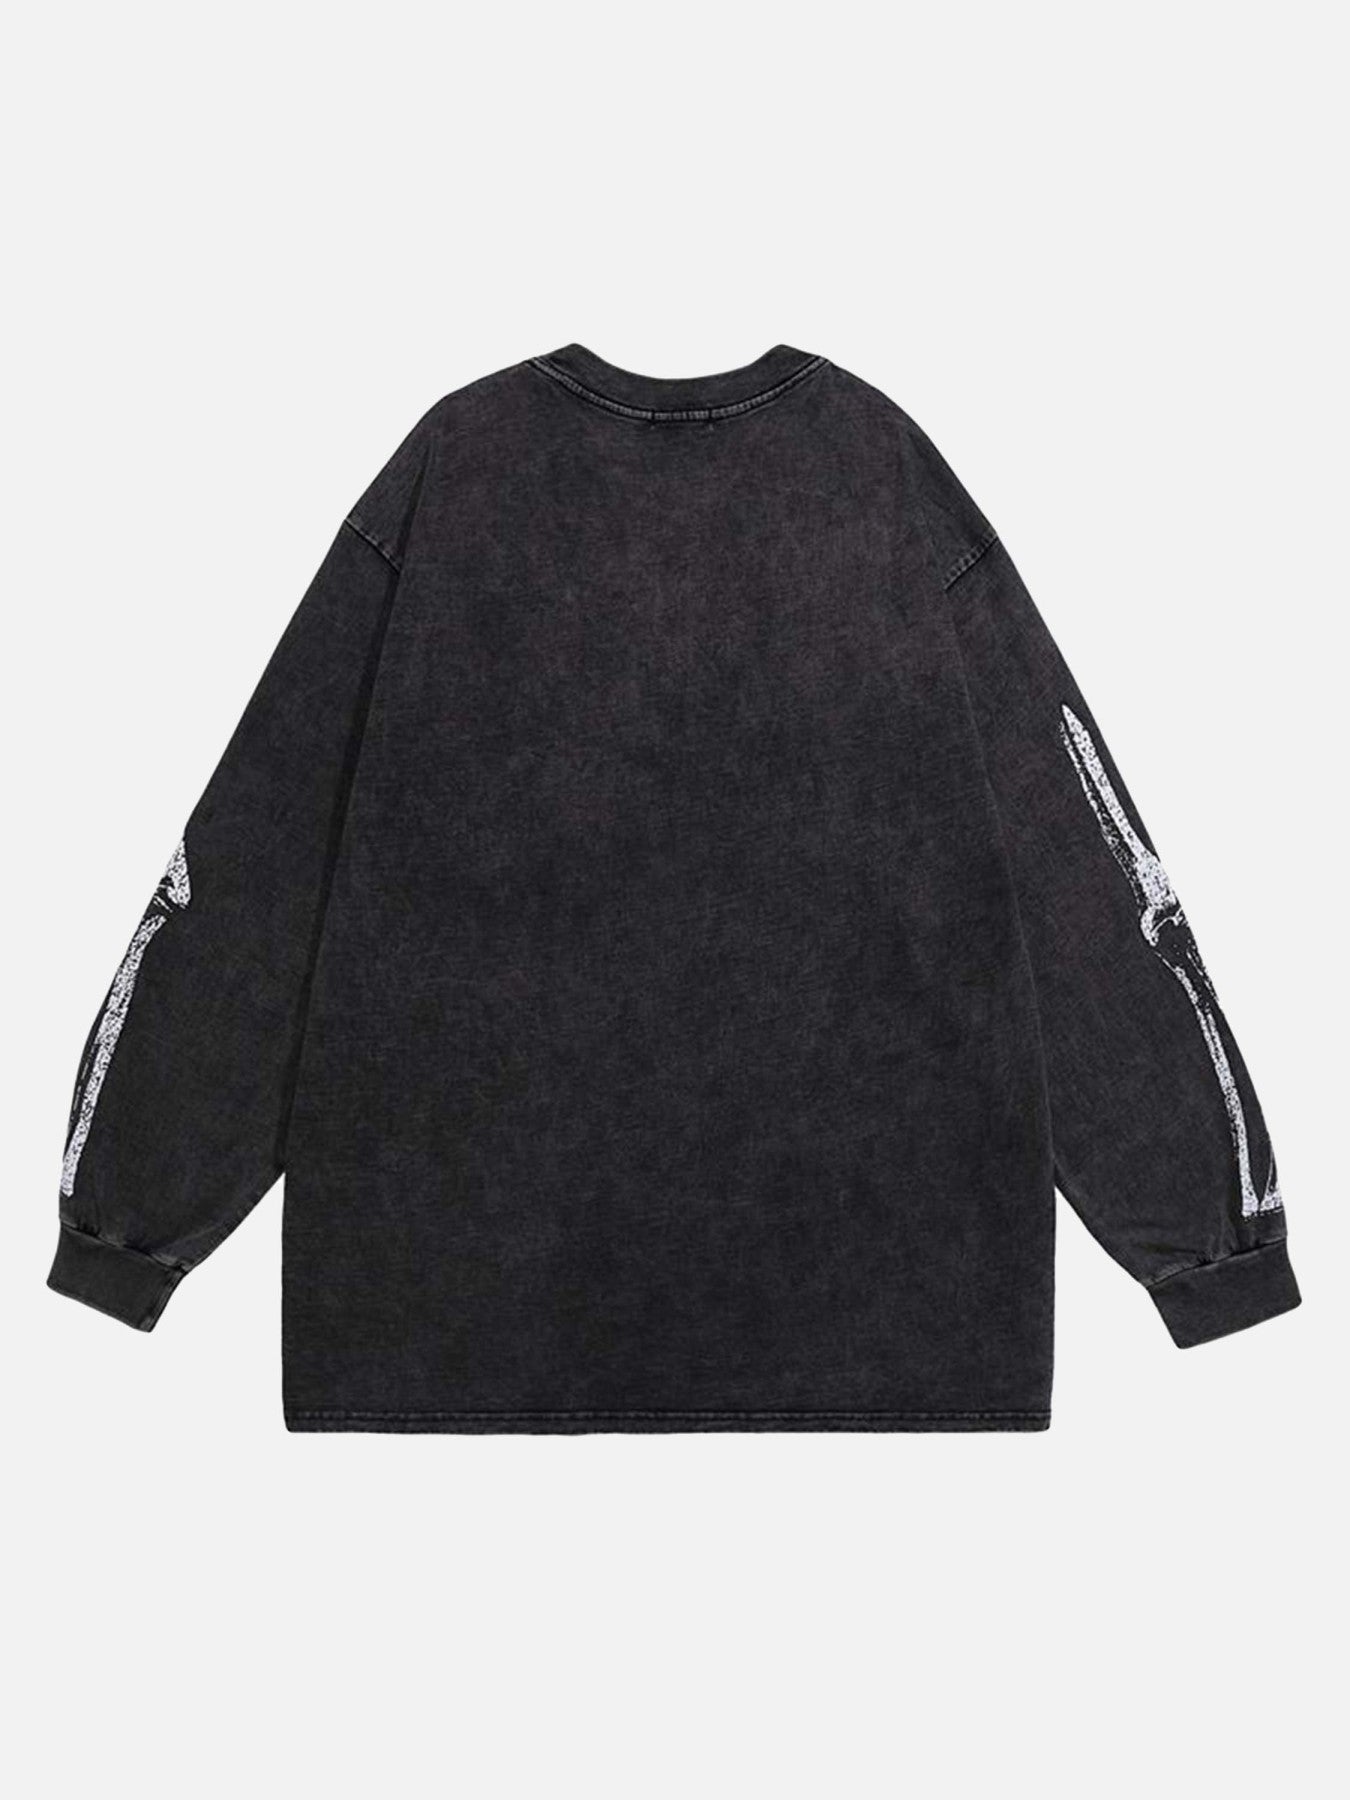 The Supermade Washed And Aged Crew Neck Sweatshirt